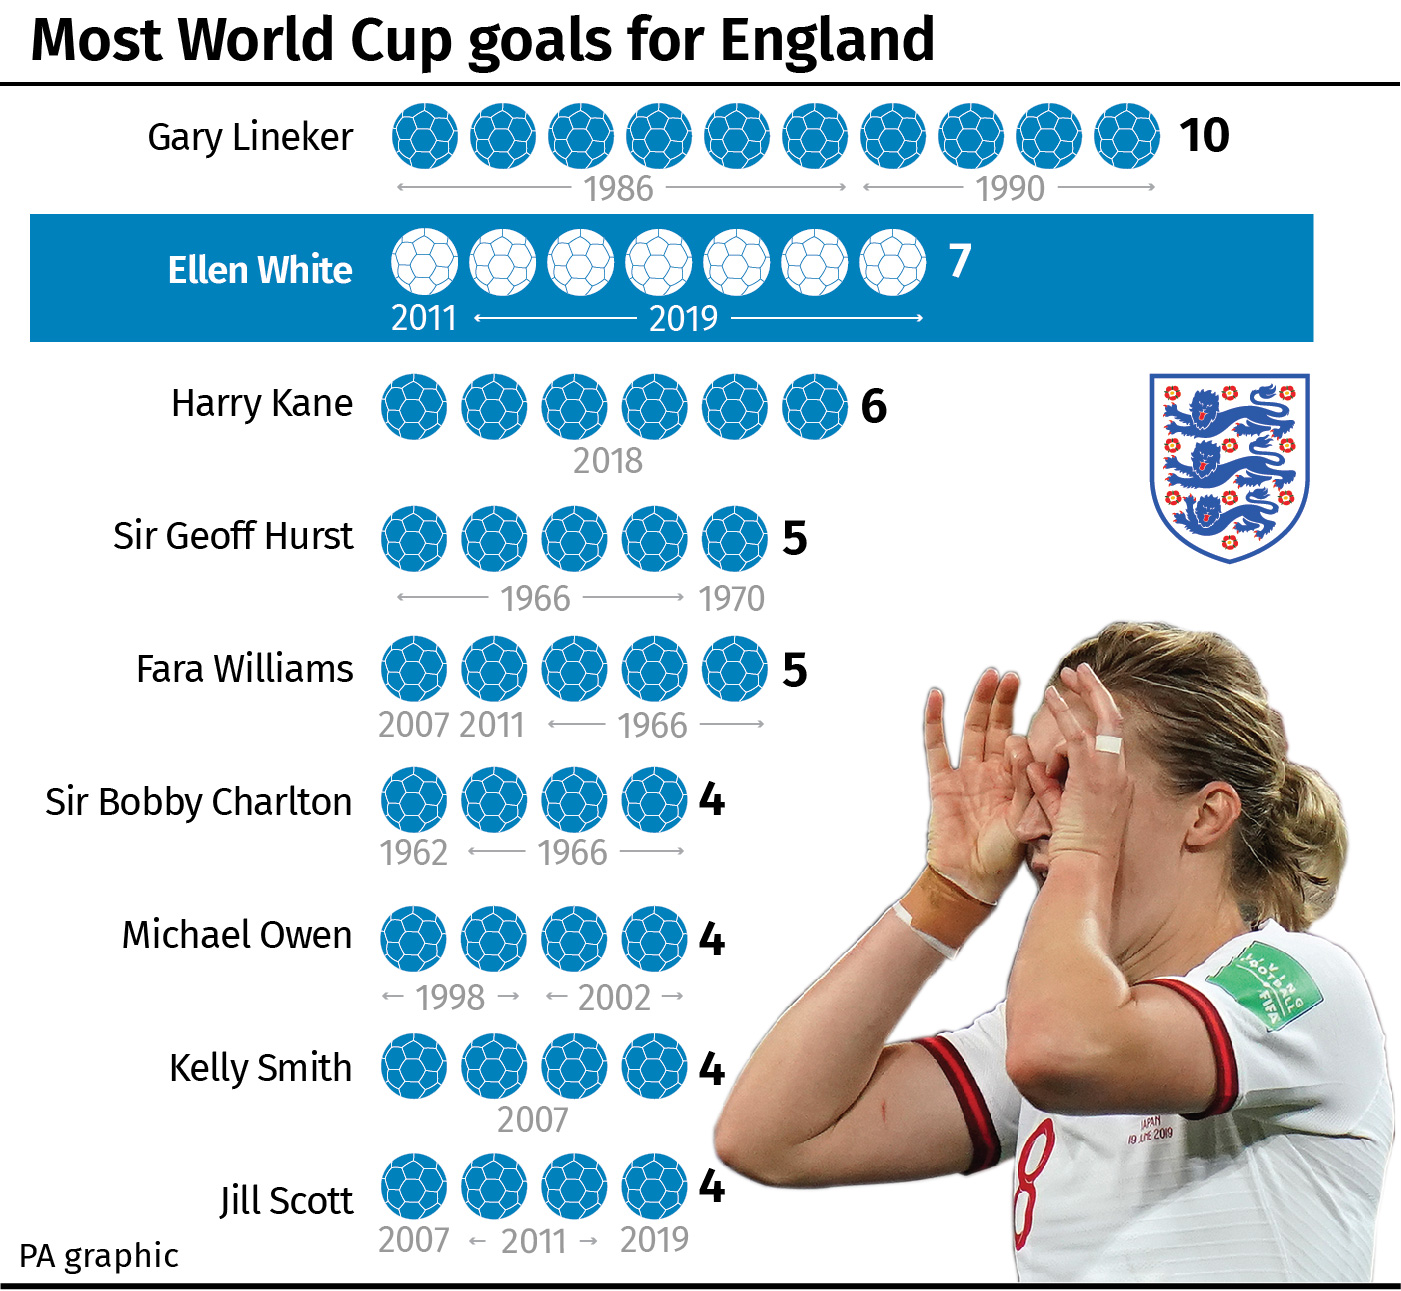 Most World Cup goals for England